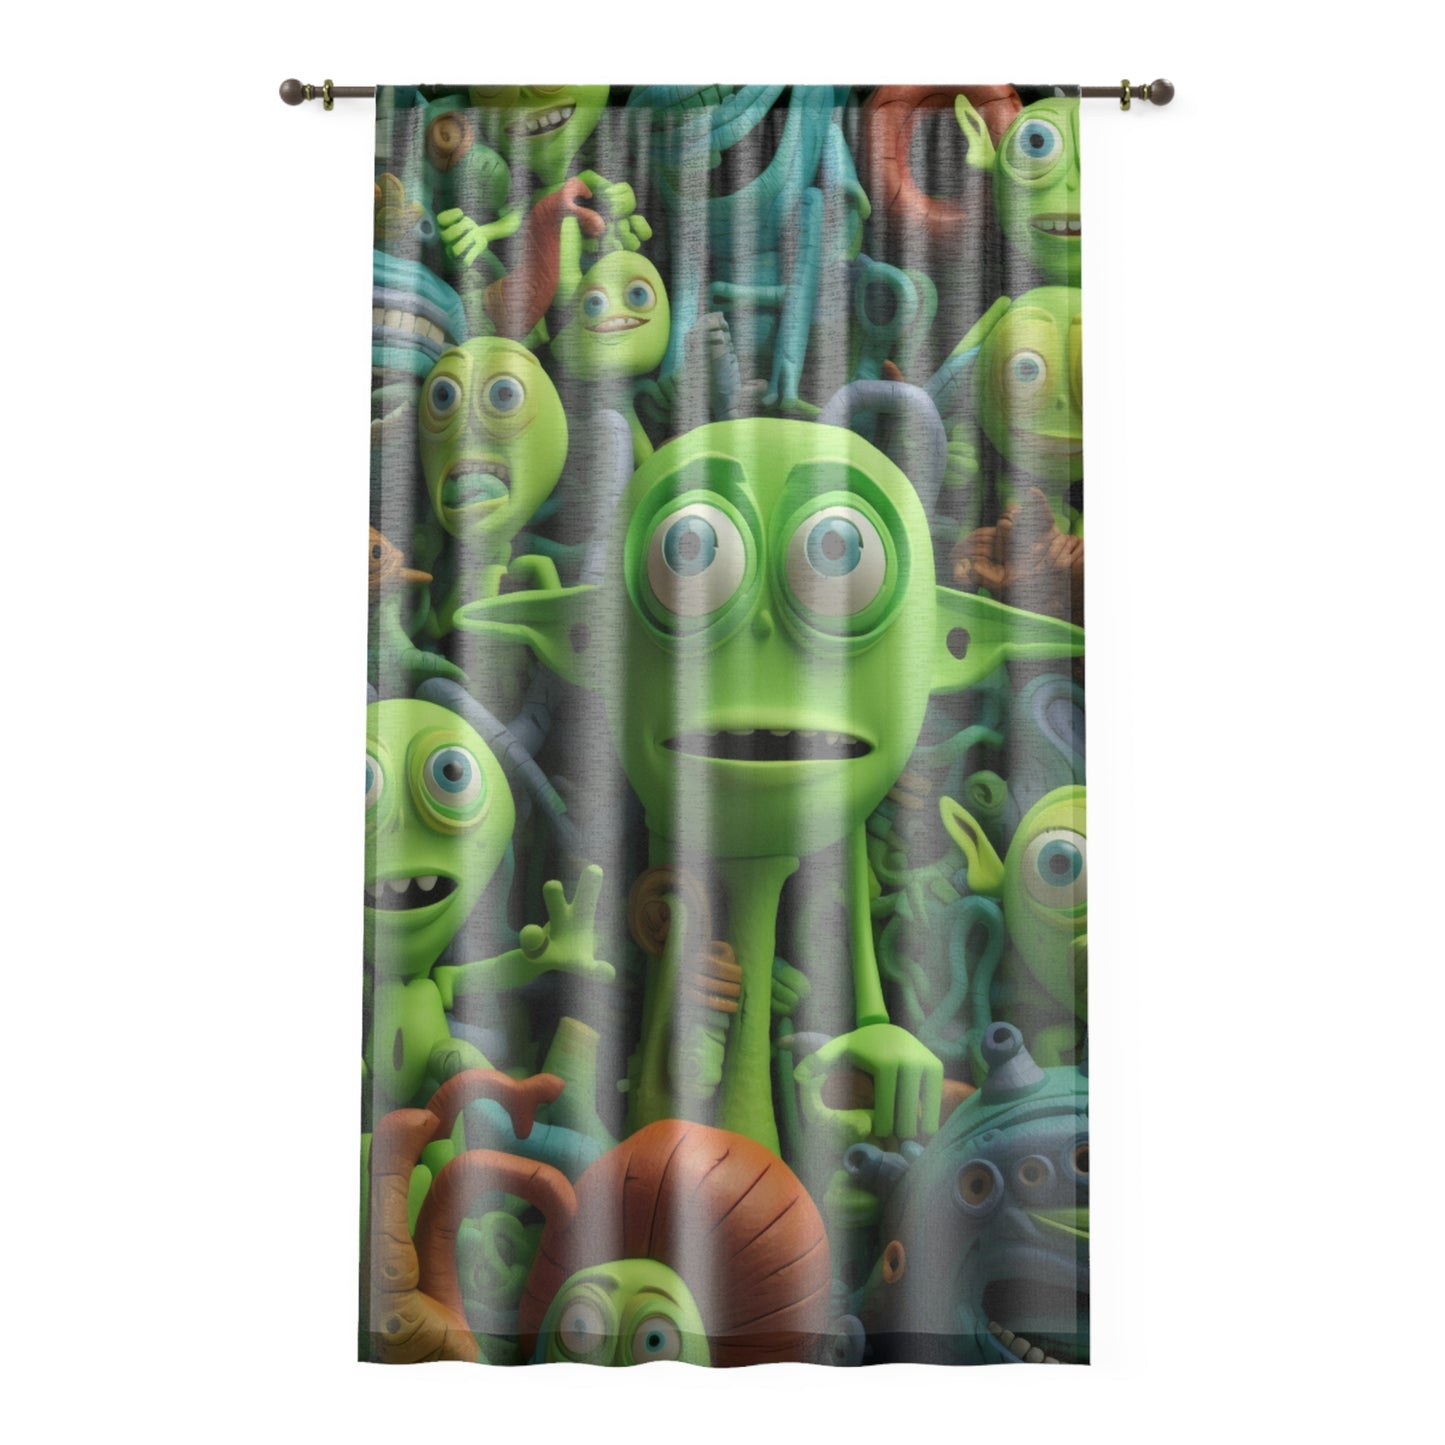 Toy Alien Story Space Character Galactic UFO Anime Cartoon - Window Curtain